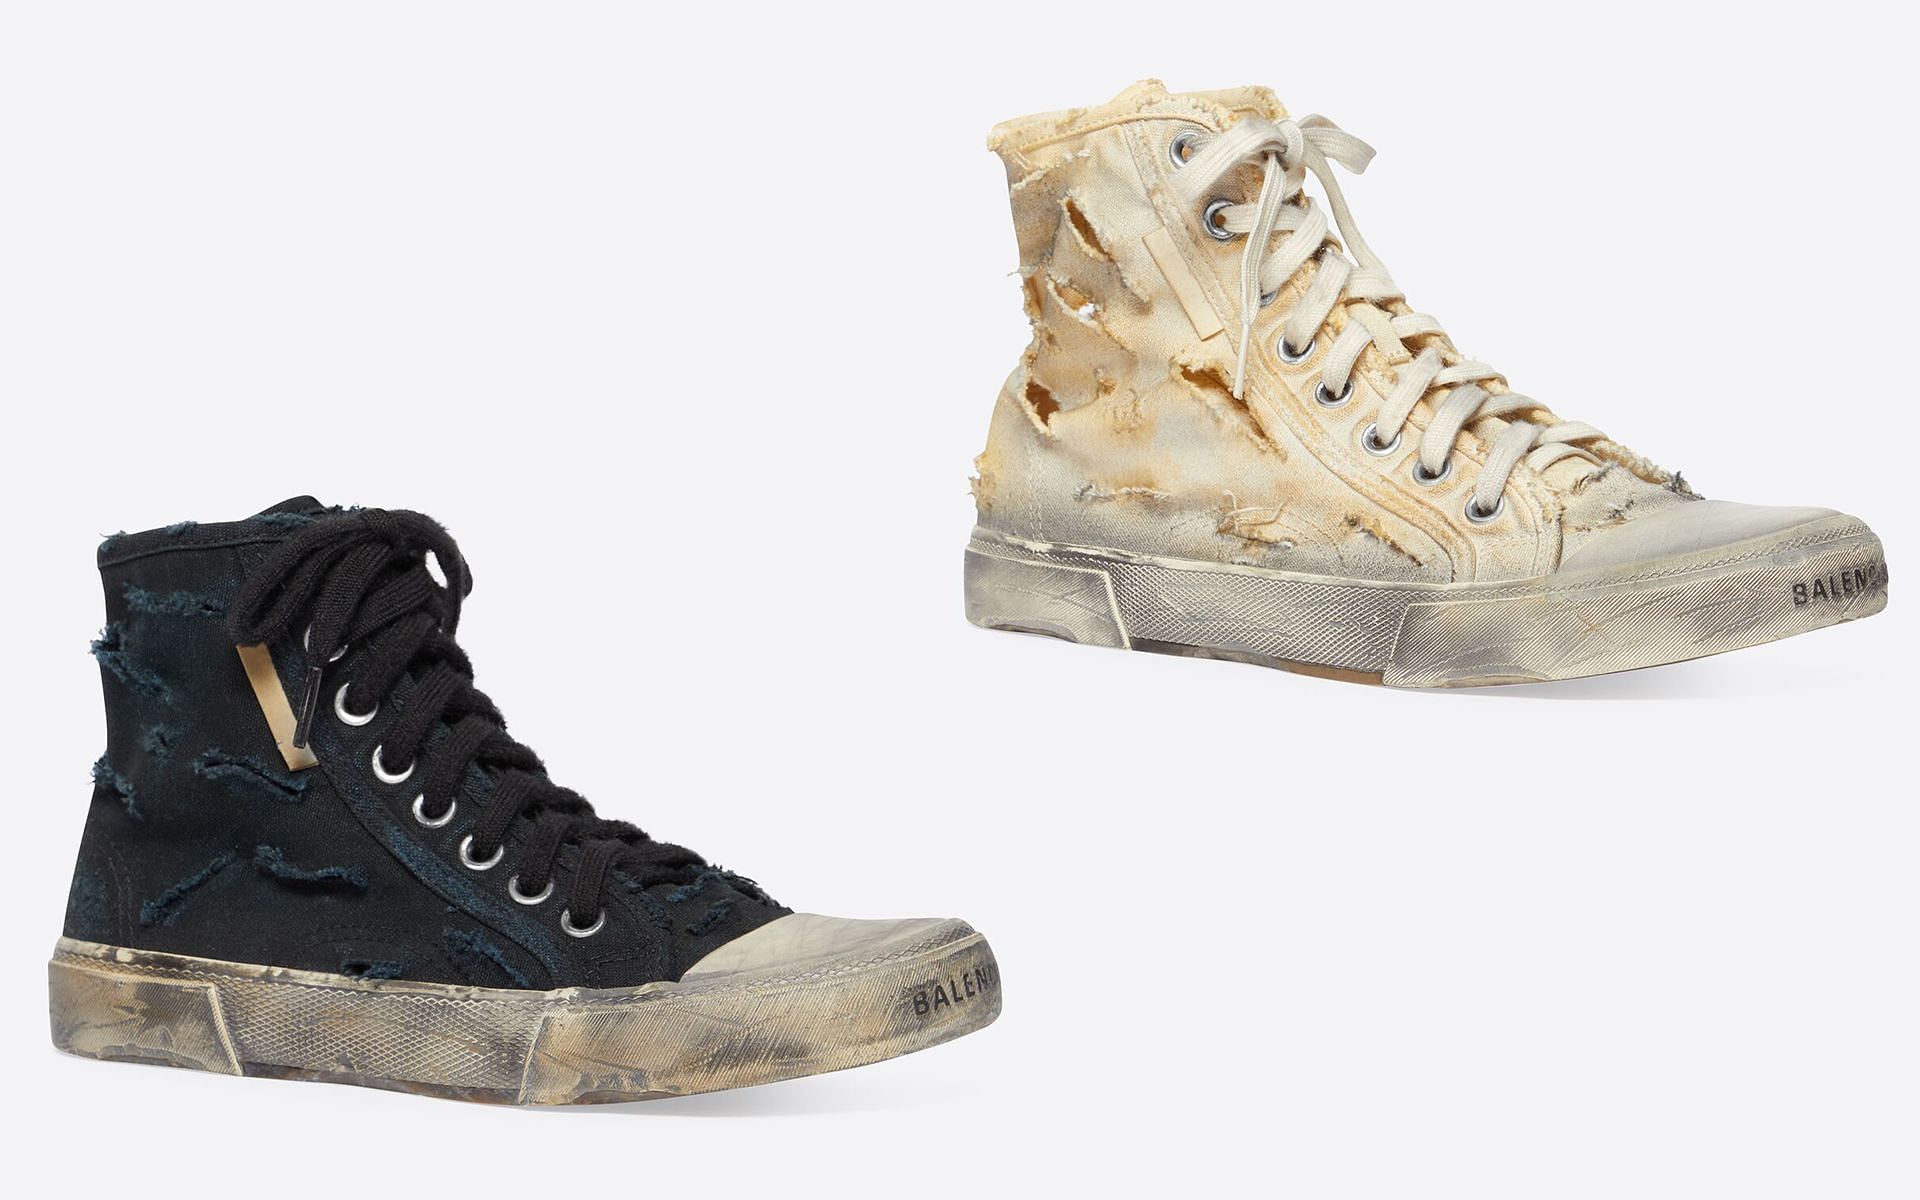 Paris footwear collection&#039;s Full Destroyed in Black and White colorways (Image via Balenciaga)